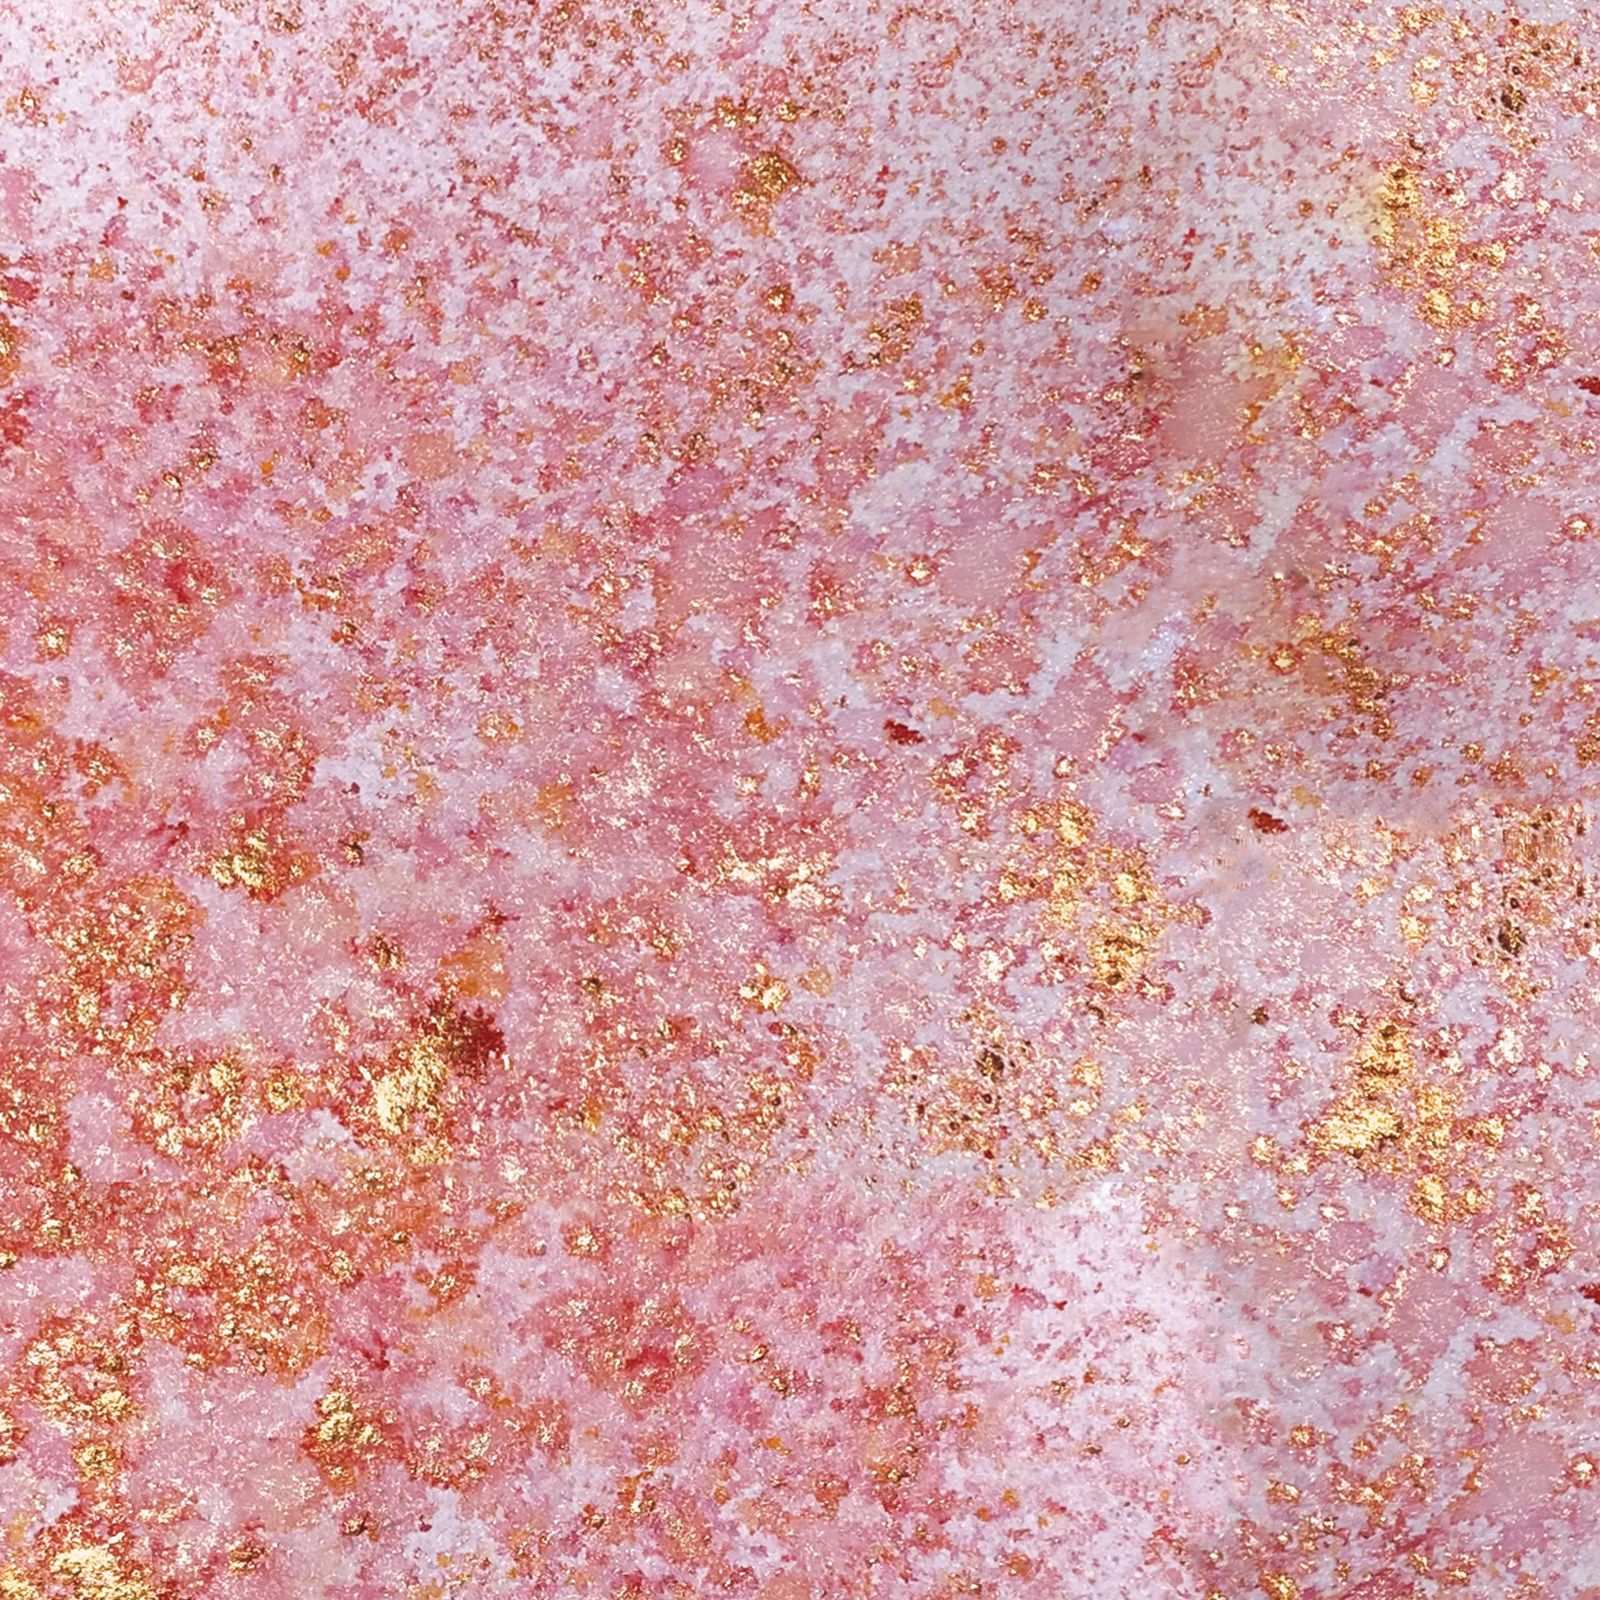 Cosmic Shimmer • Pixie sparkles Coral crush